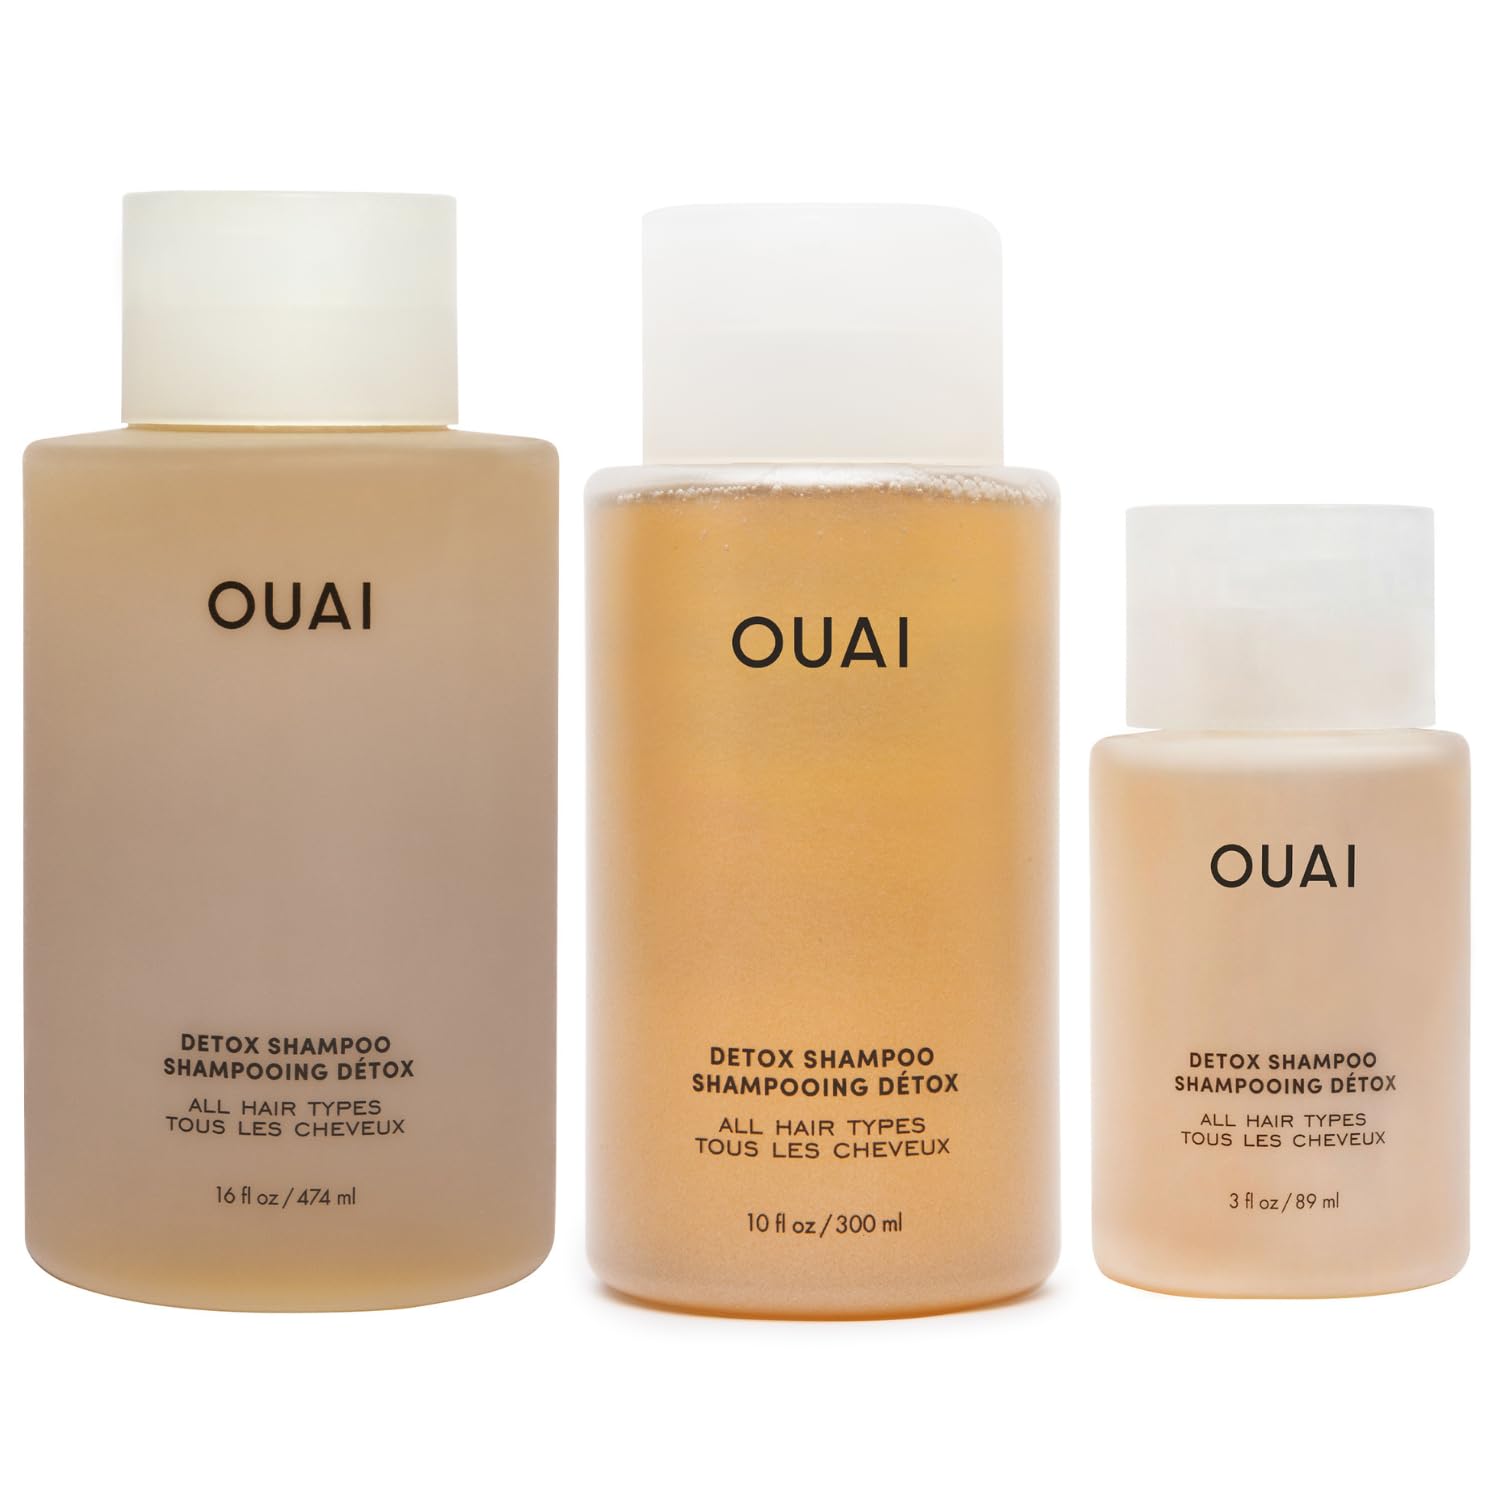 OUAI Detox Shampoo Bundle - Clarifying Shampoo for Build Up, Dirt, Oil, Product & Hard Water - With Apple Cider Vinegar & Keratin - Sulfate-Free Hair Care (3 Count, 3oz/10oz/16oz)